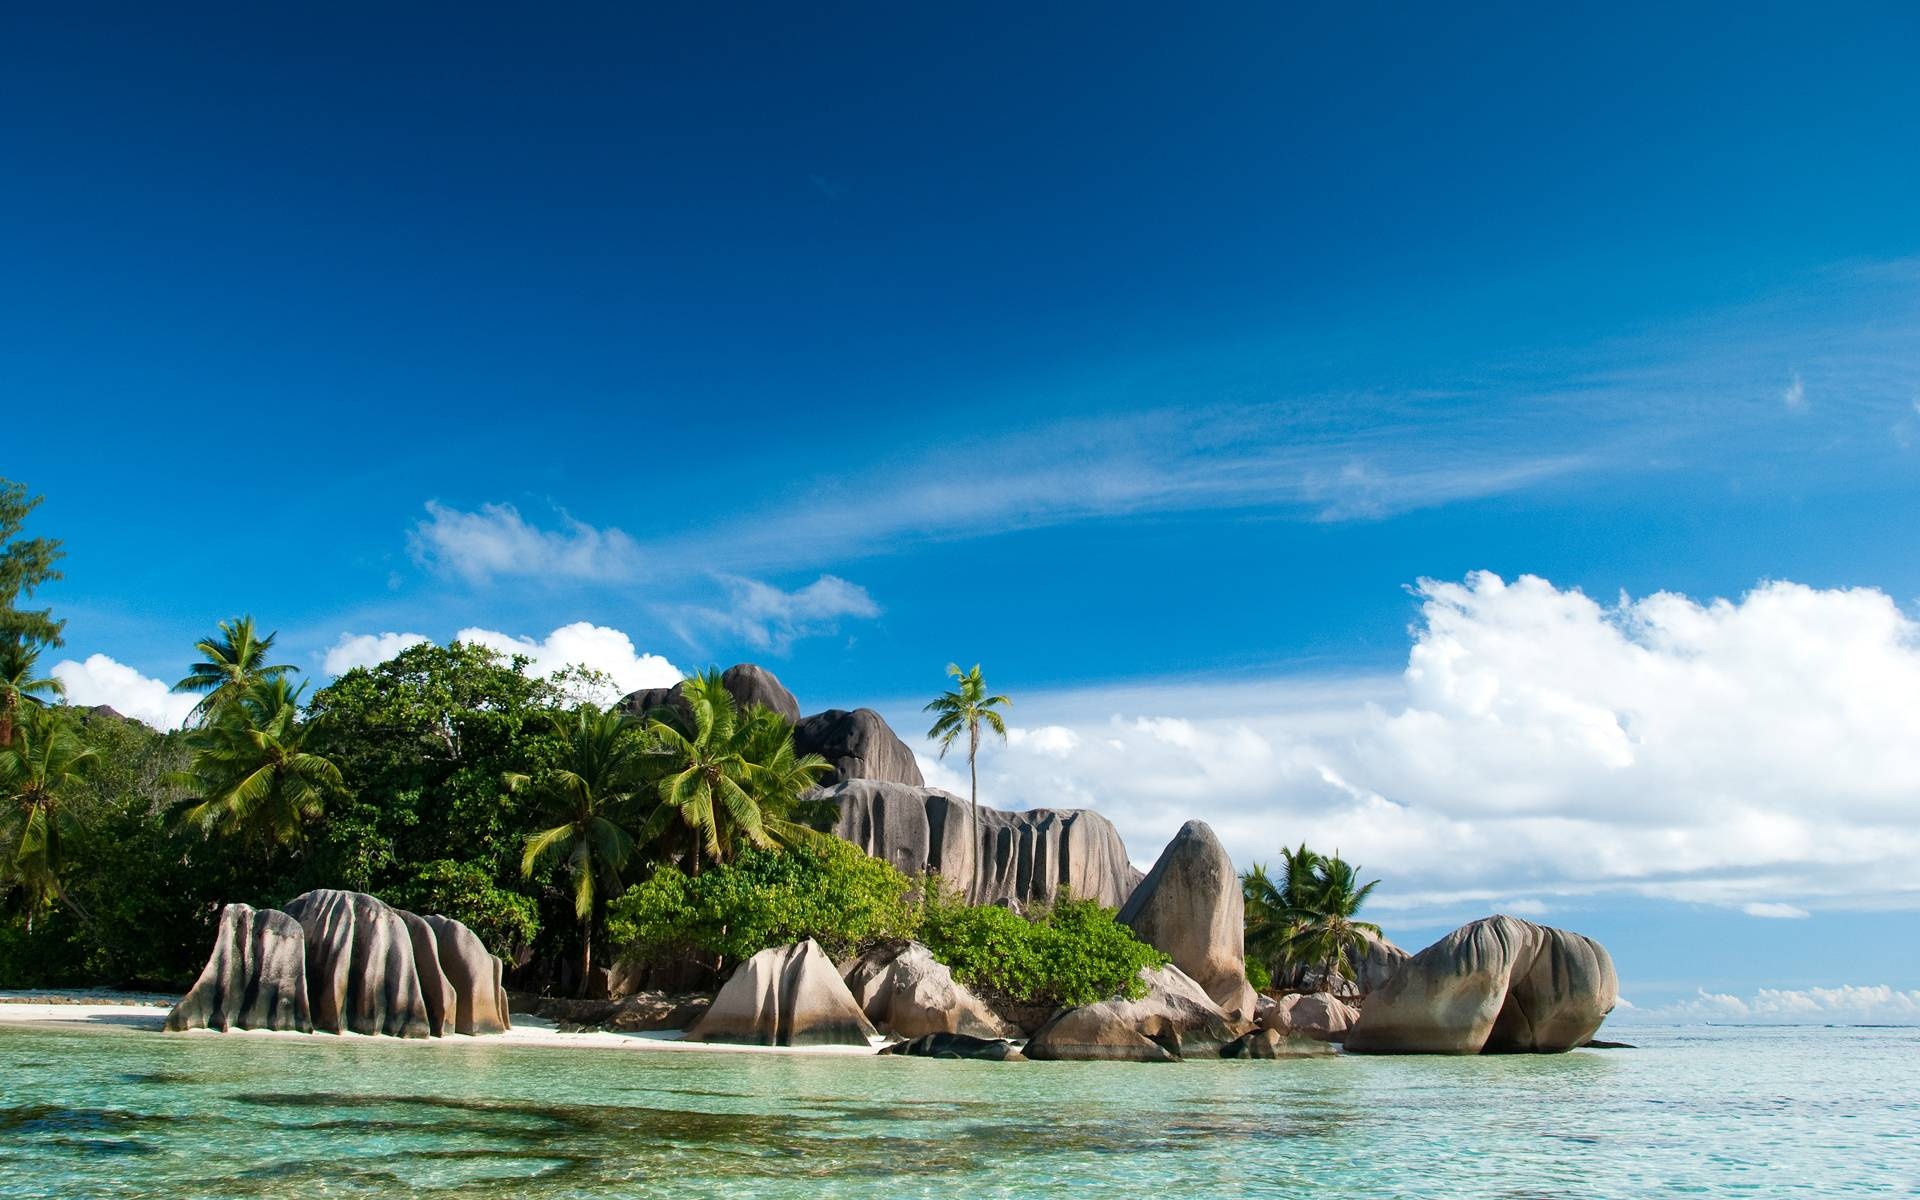 Seychelles wallpapers, Stunning backgrounds, Breathtaking views, Picture-perfect, 1920x1200 HD Desktop